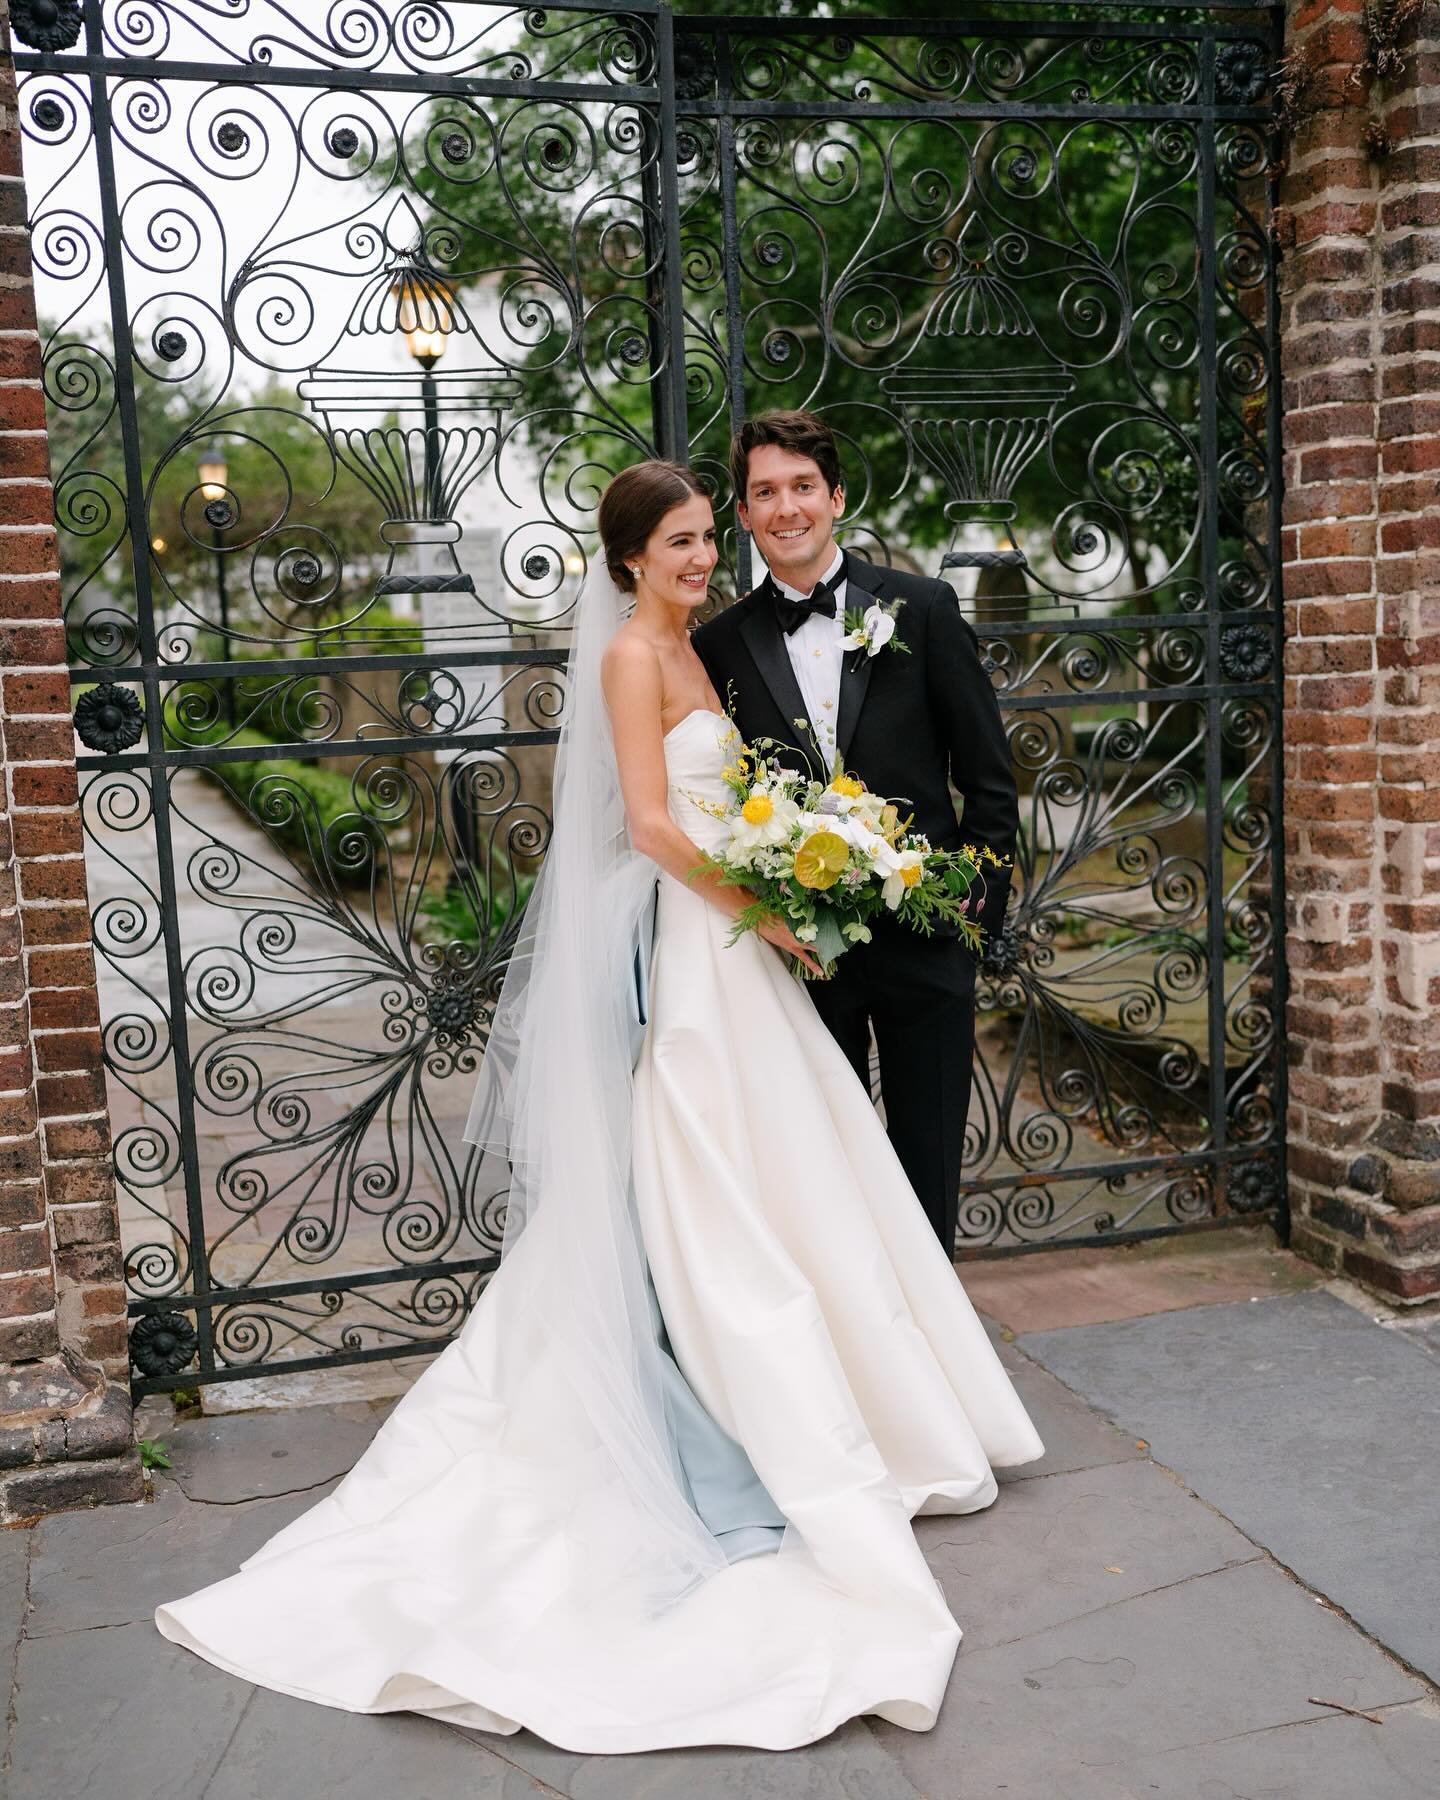 Happy first anniversary, Meredith and Dylan! Here are some favorites from their beautiful wedding in downtown Charleston! 🩵
.
.
.
Design and Coordination:&nbsp;@grove.designs.co
Photo: @emilykbarbee
Hair and Makeup: @blushingbridescharleston
Wedding